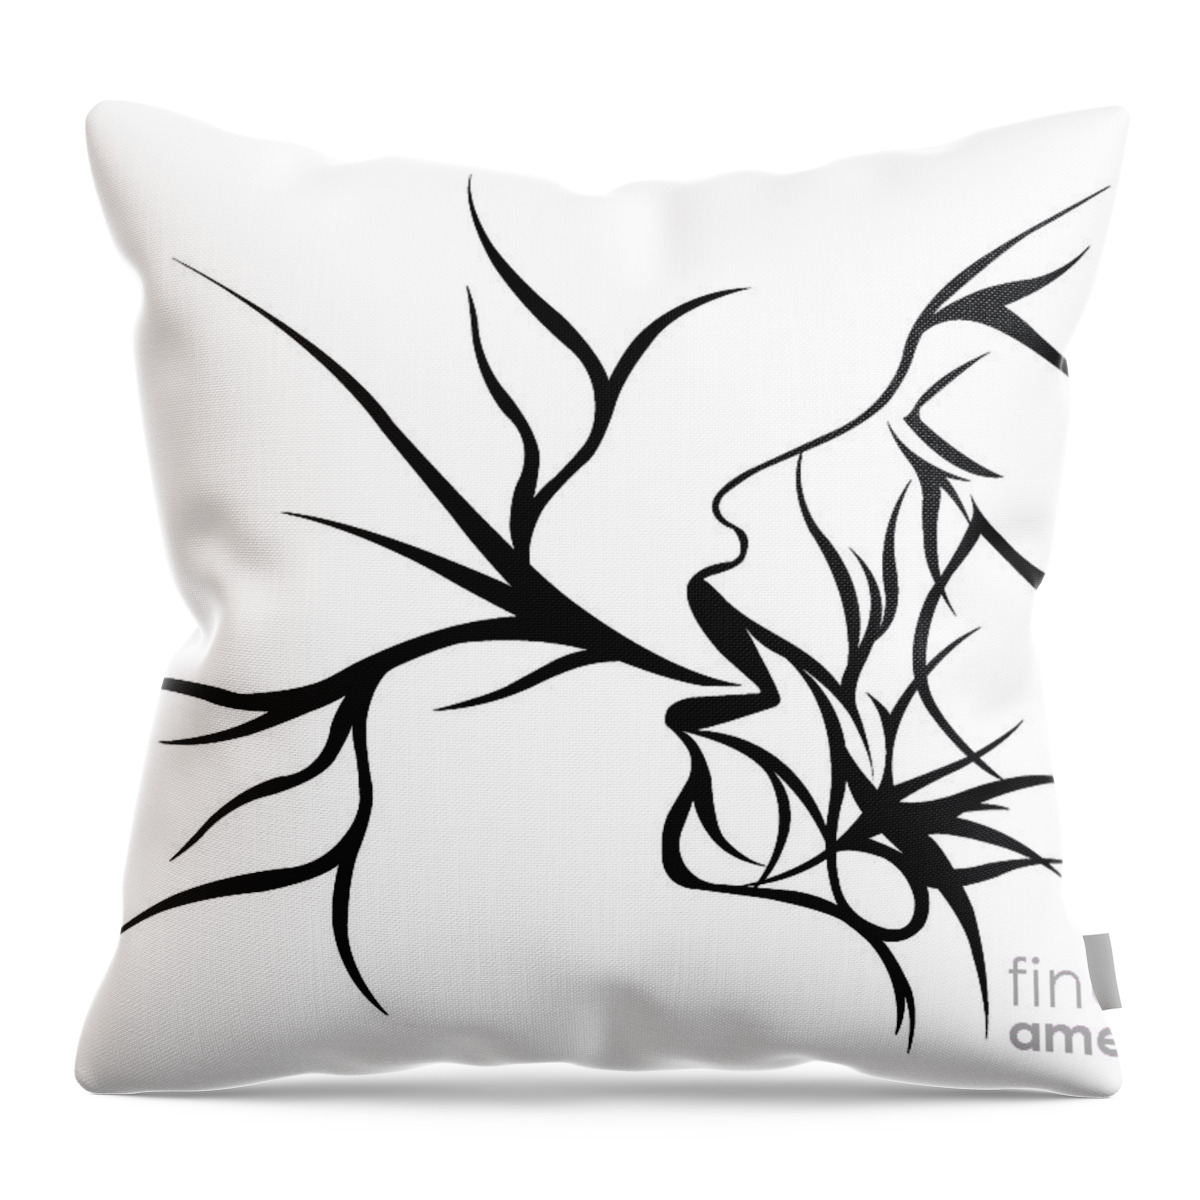  Throw Pillow featuring the digital art Plethora by JamieLynn Warber